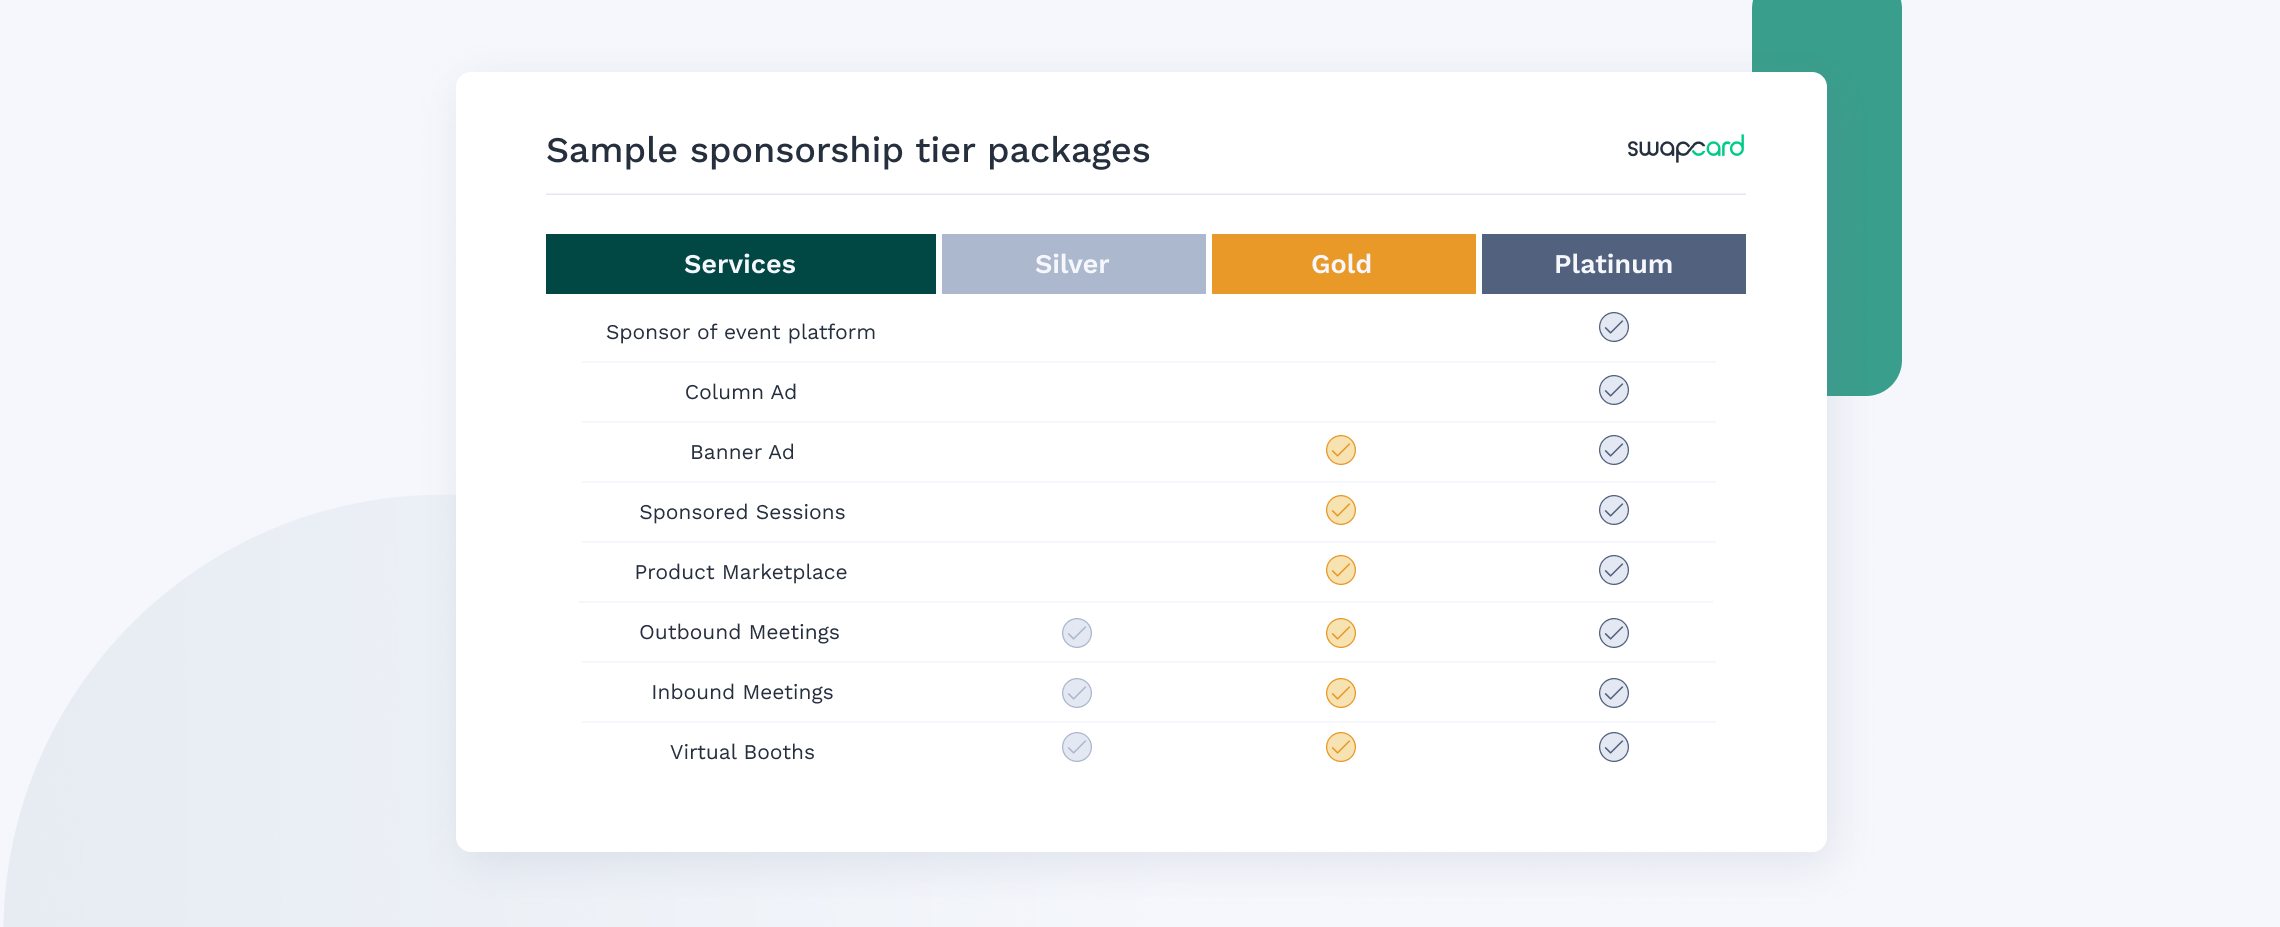 Swapcard_Trade_Show_Monetization_SponsorshipTierPackages